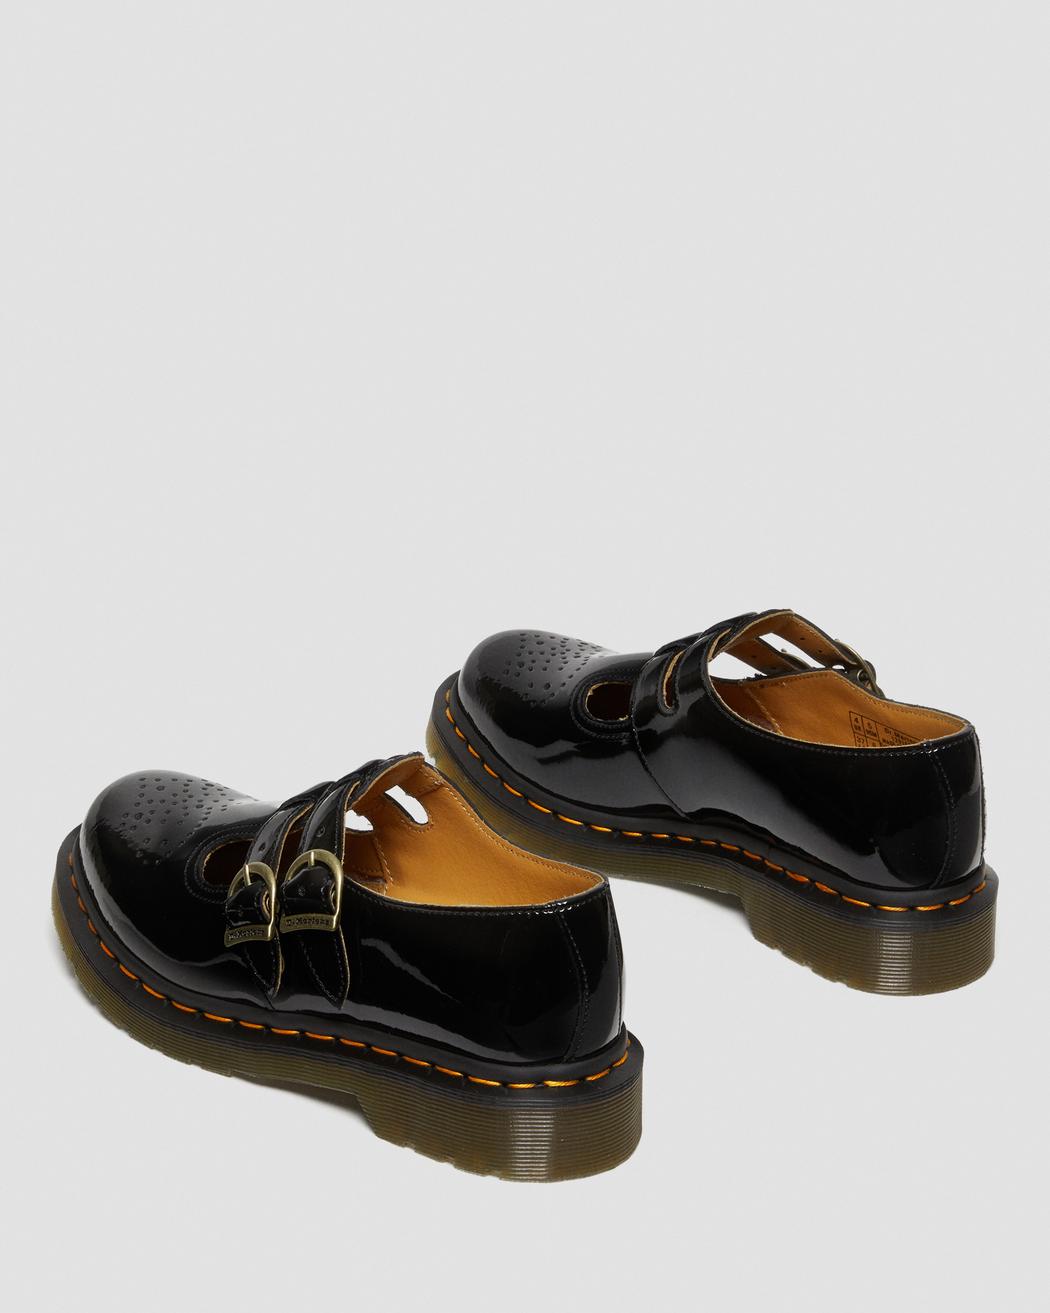 8065 Patent Leather Mary Jane Shoes | Dr. Martens